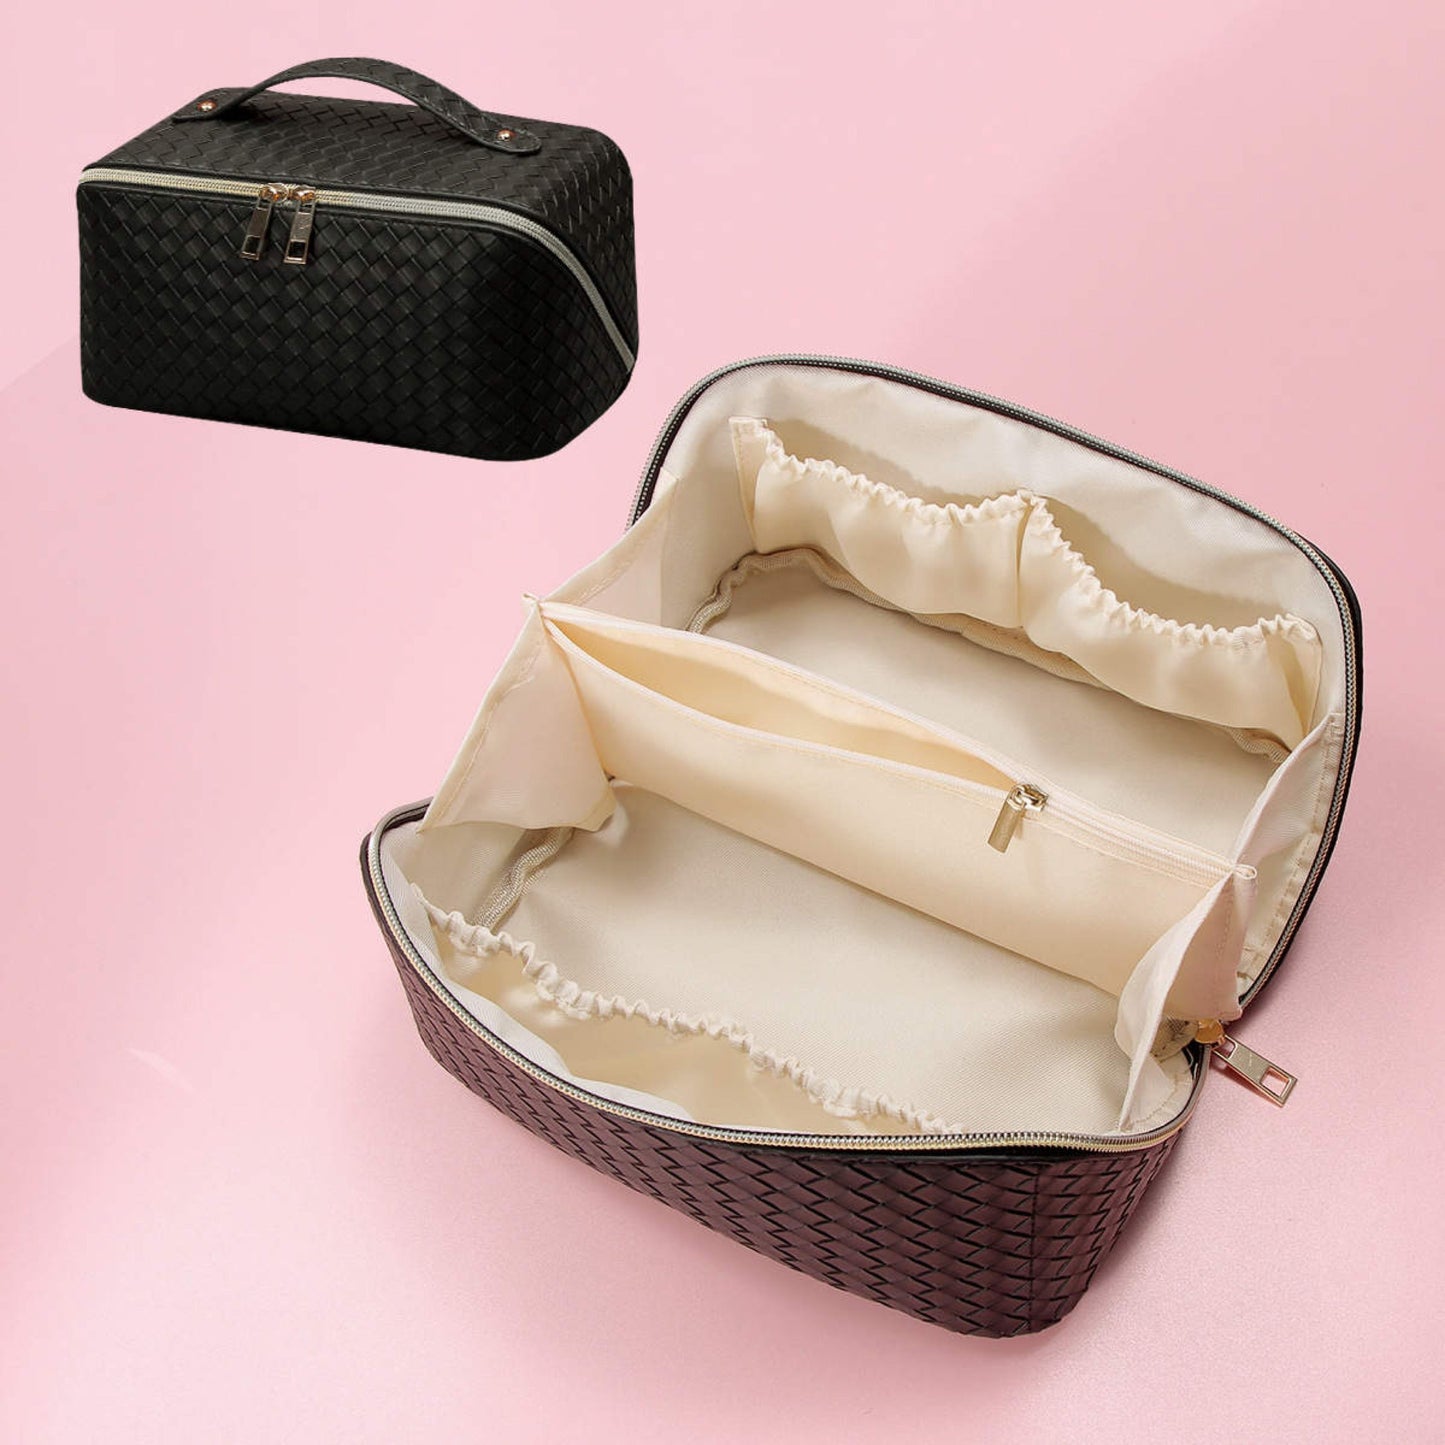 Oversized Lay Flat Cosmetic Bag - Woven Solids - PREORDER 5/14-5/16